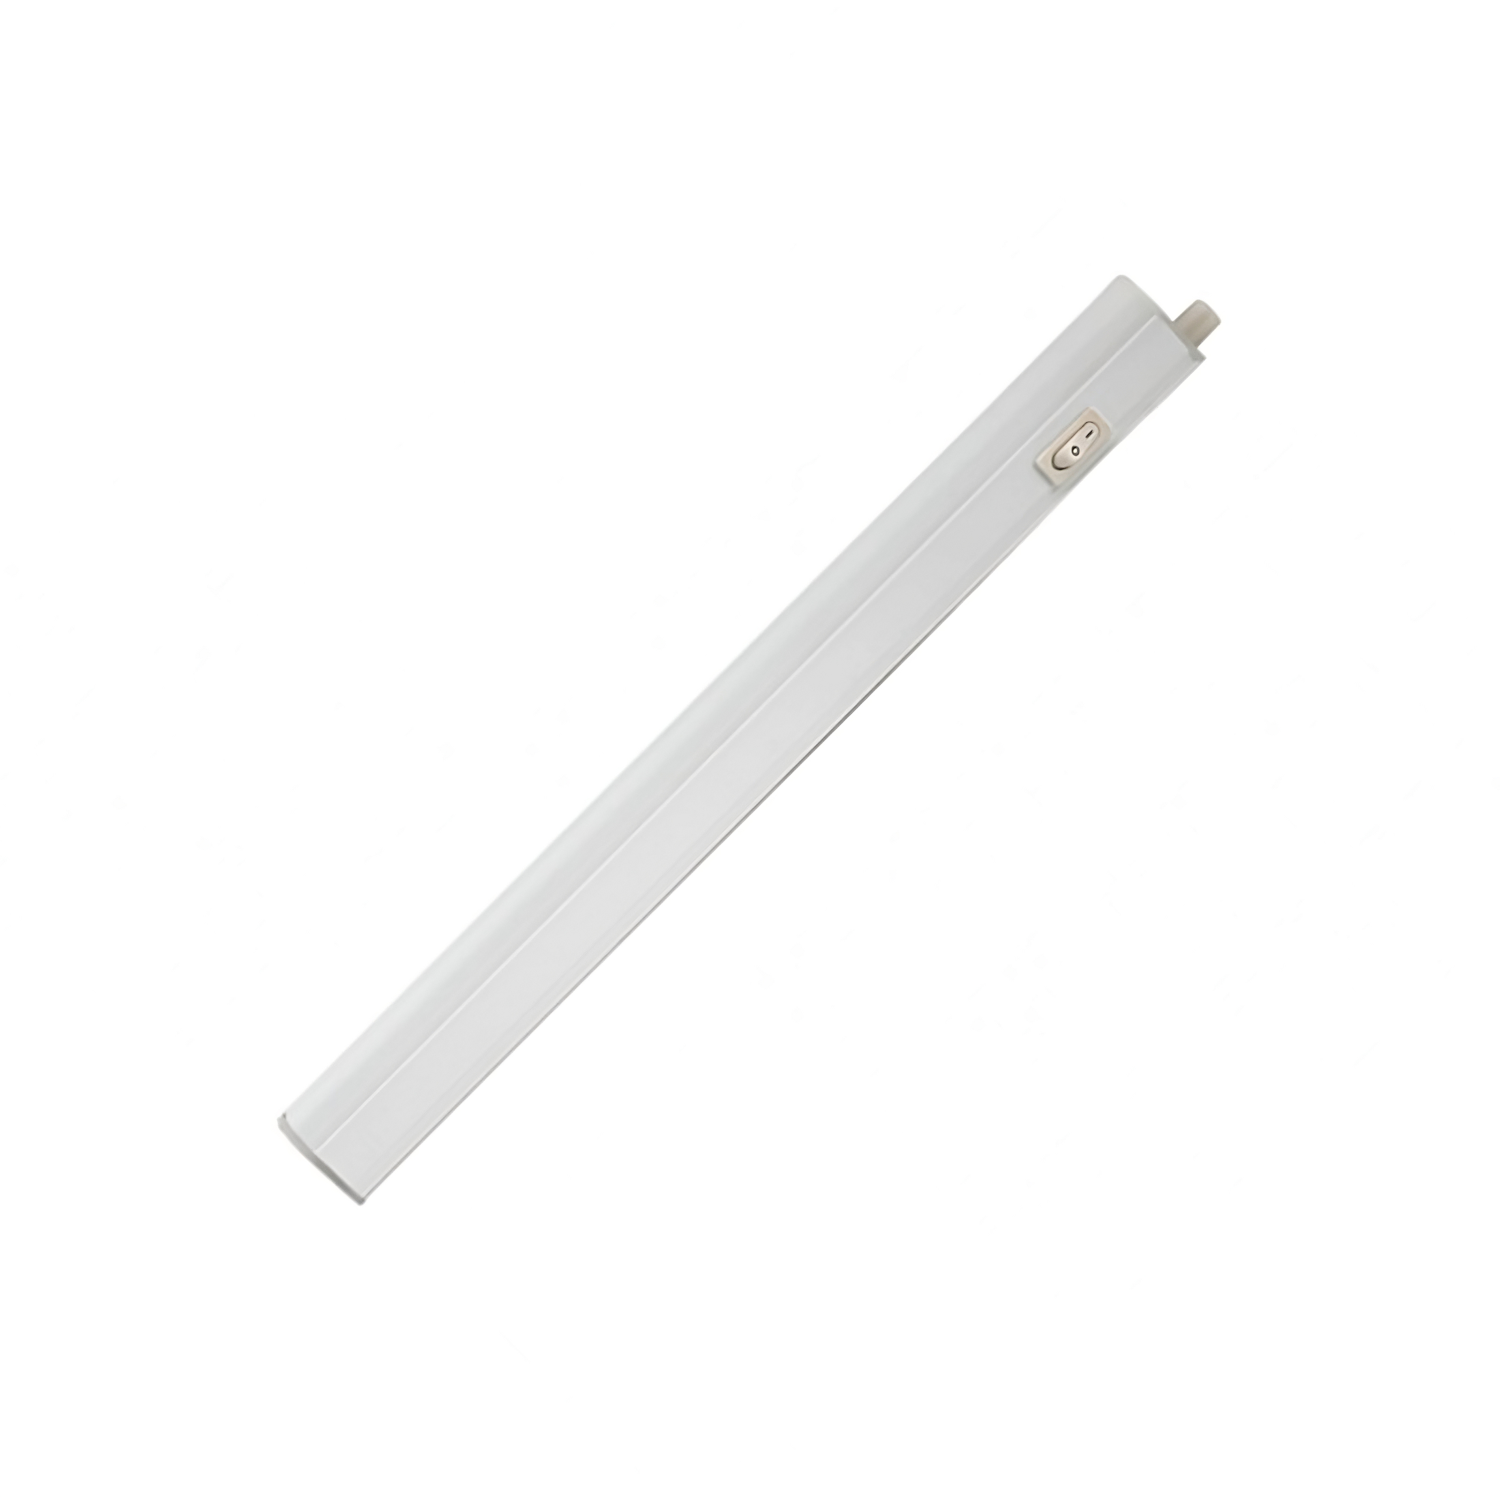 Product image of LED Strip Light 255mm with Plug and Lead